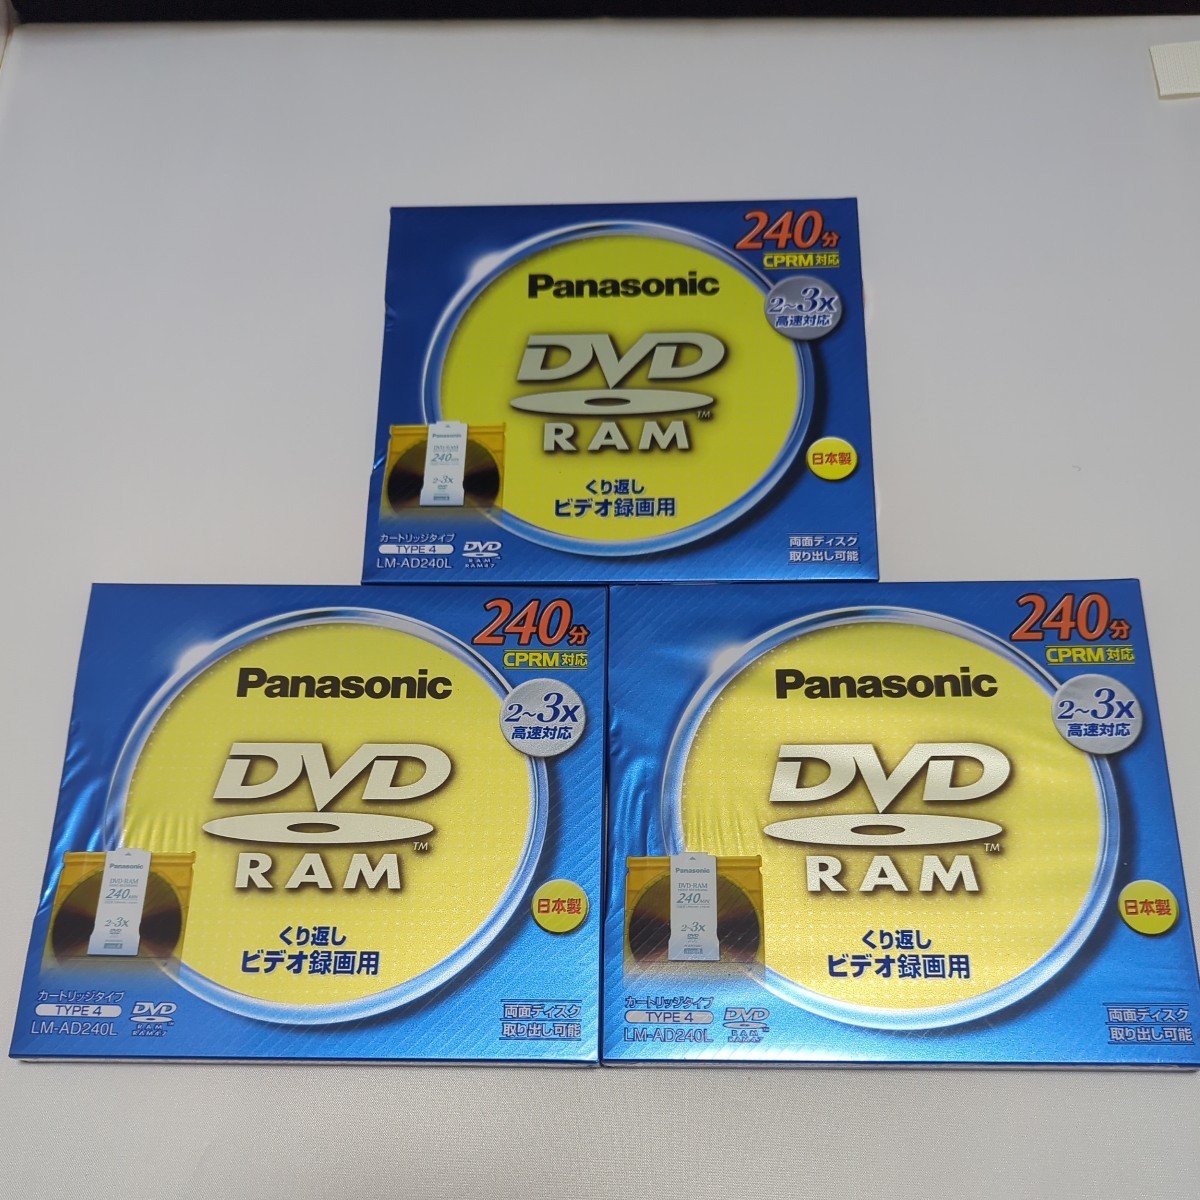  new goods unused famous manufacturer video recording for &PC data for DVD-RAM(9.4GB,4.7GB) total 19 sheets + service goods as breaking the seal ending unused goods 2 sheets = total 21 pieces set 